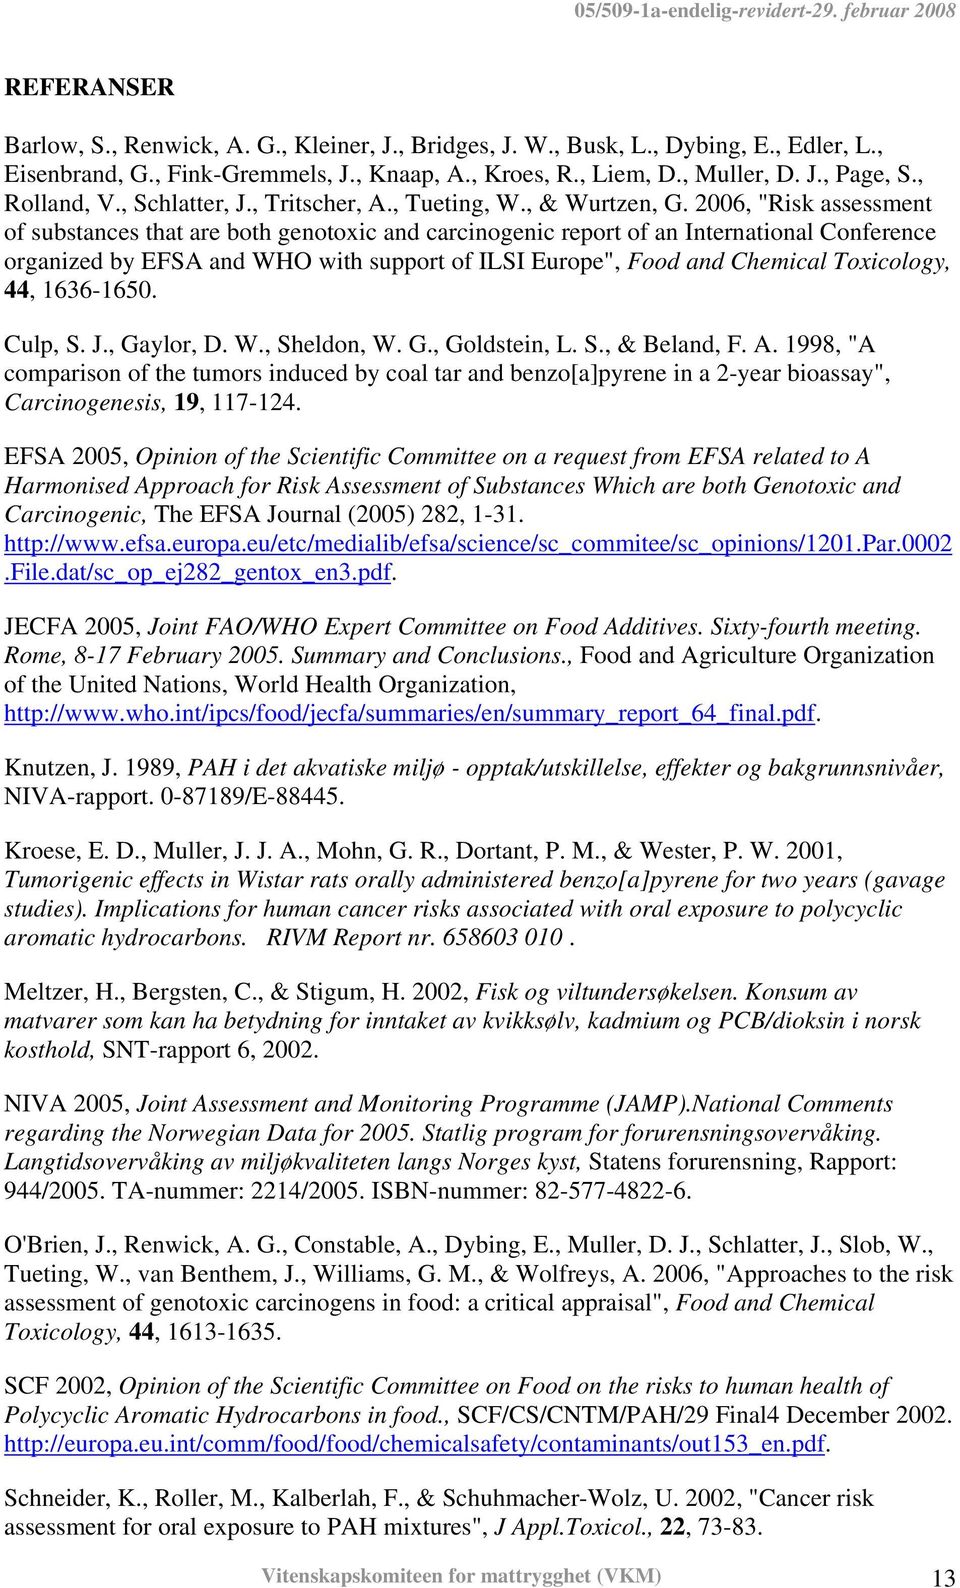 2006, "Risk assessment of substances that are both genotoxic and carcinogenic report of an International Conference organized by EFSA and WHO with support of ILSI Europe", Food and Chemical